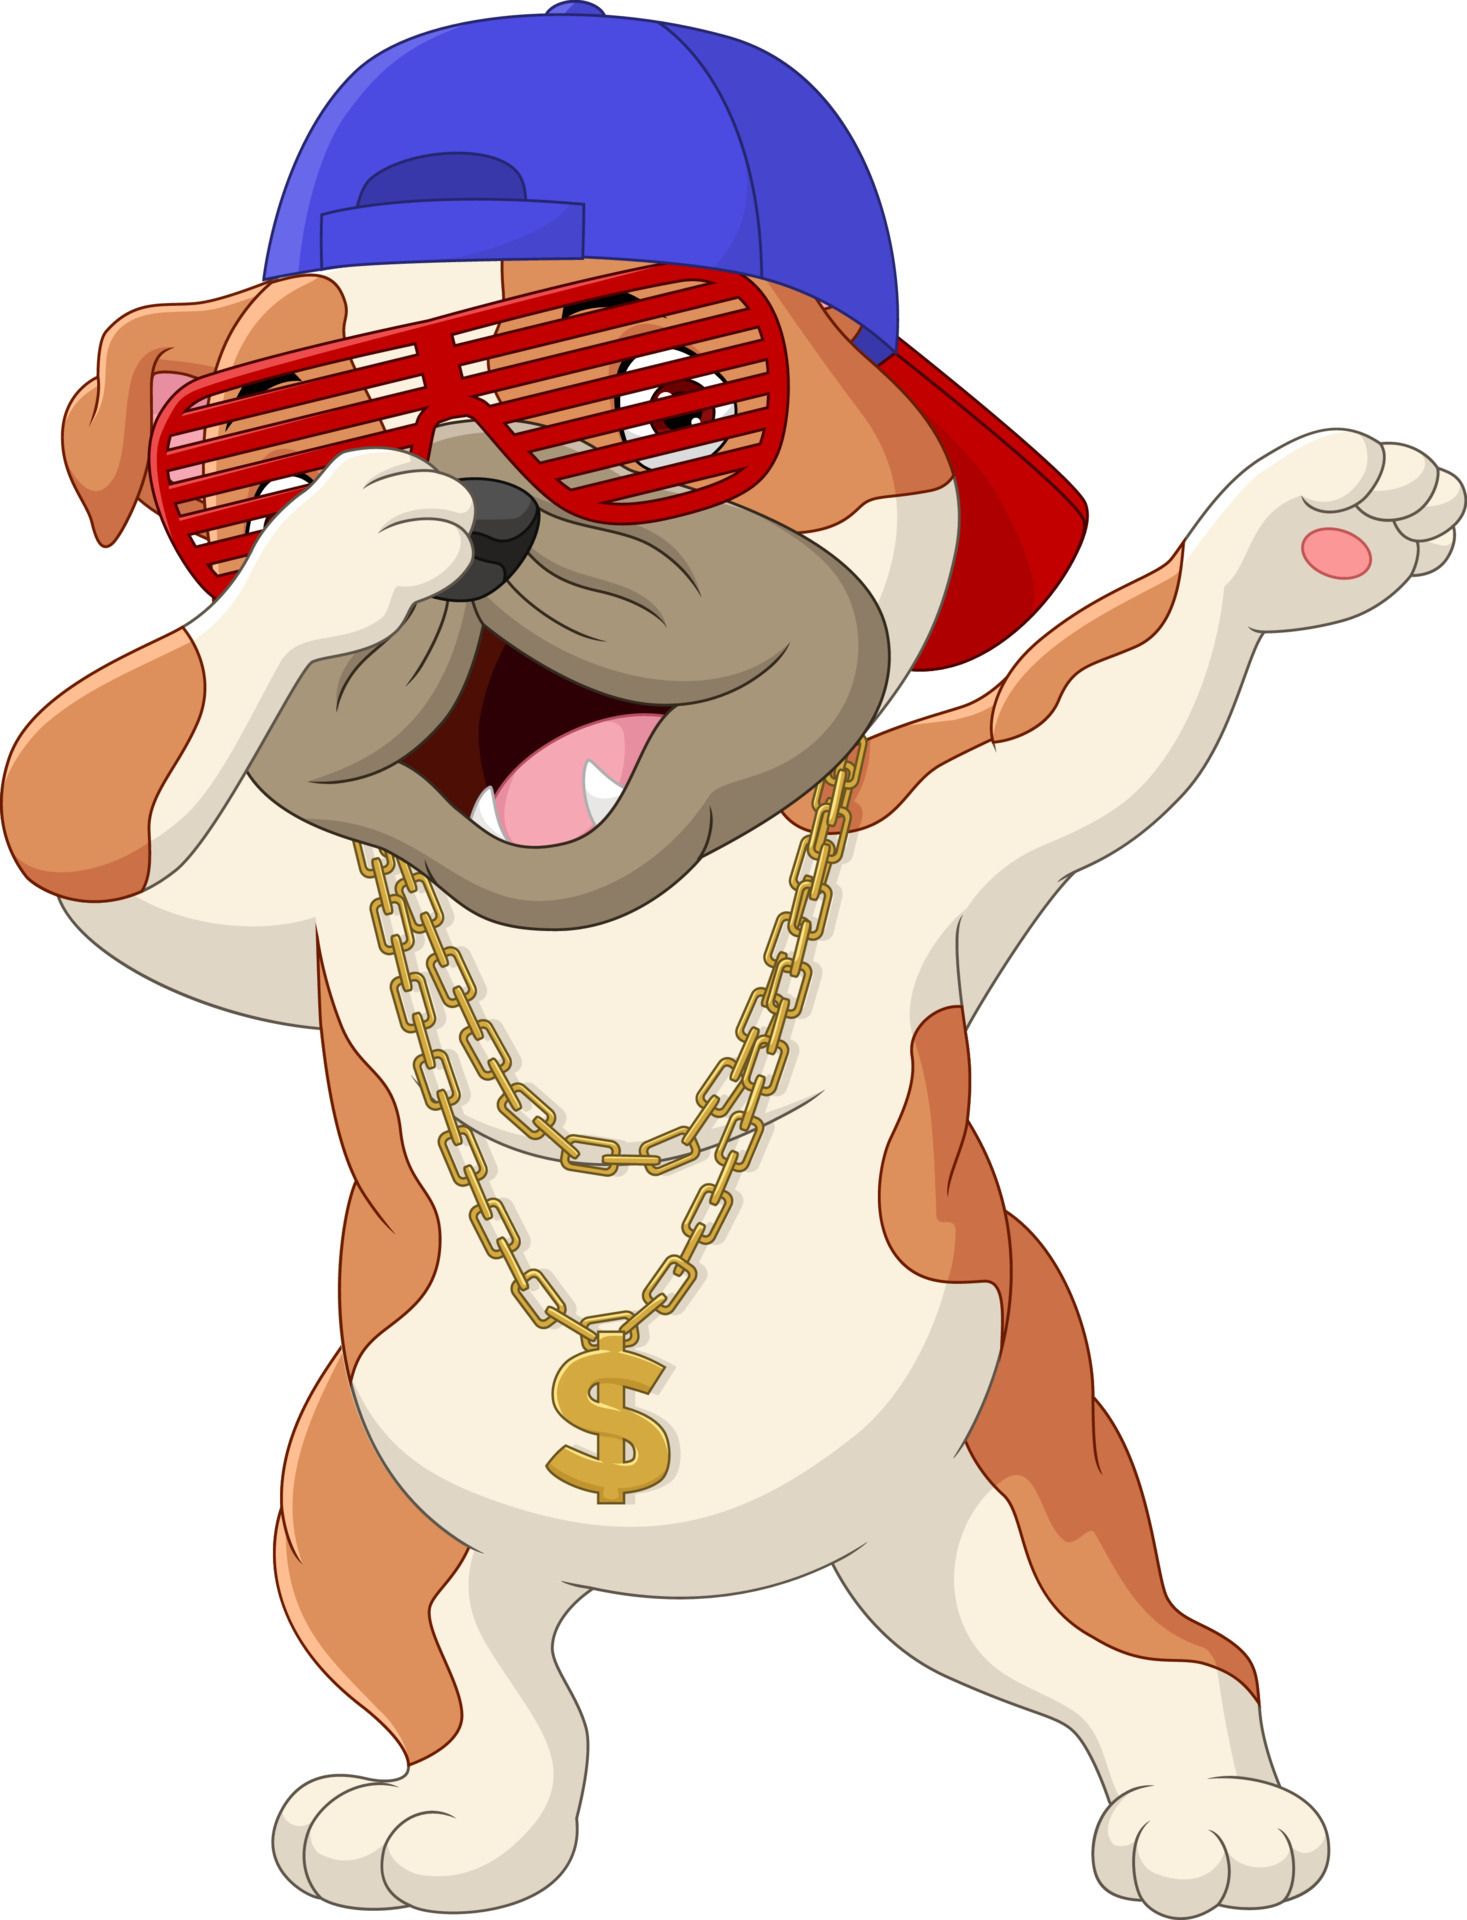 Cute dog dabbing dance wearing sunglasses, hat, and gold necklace